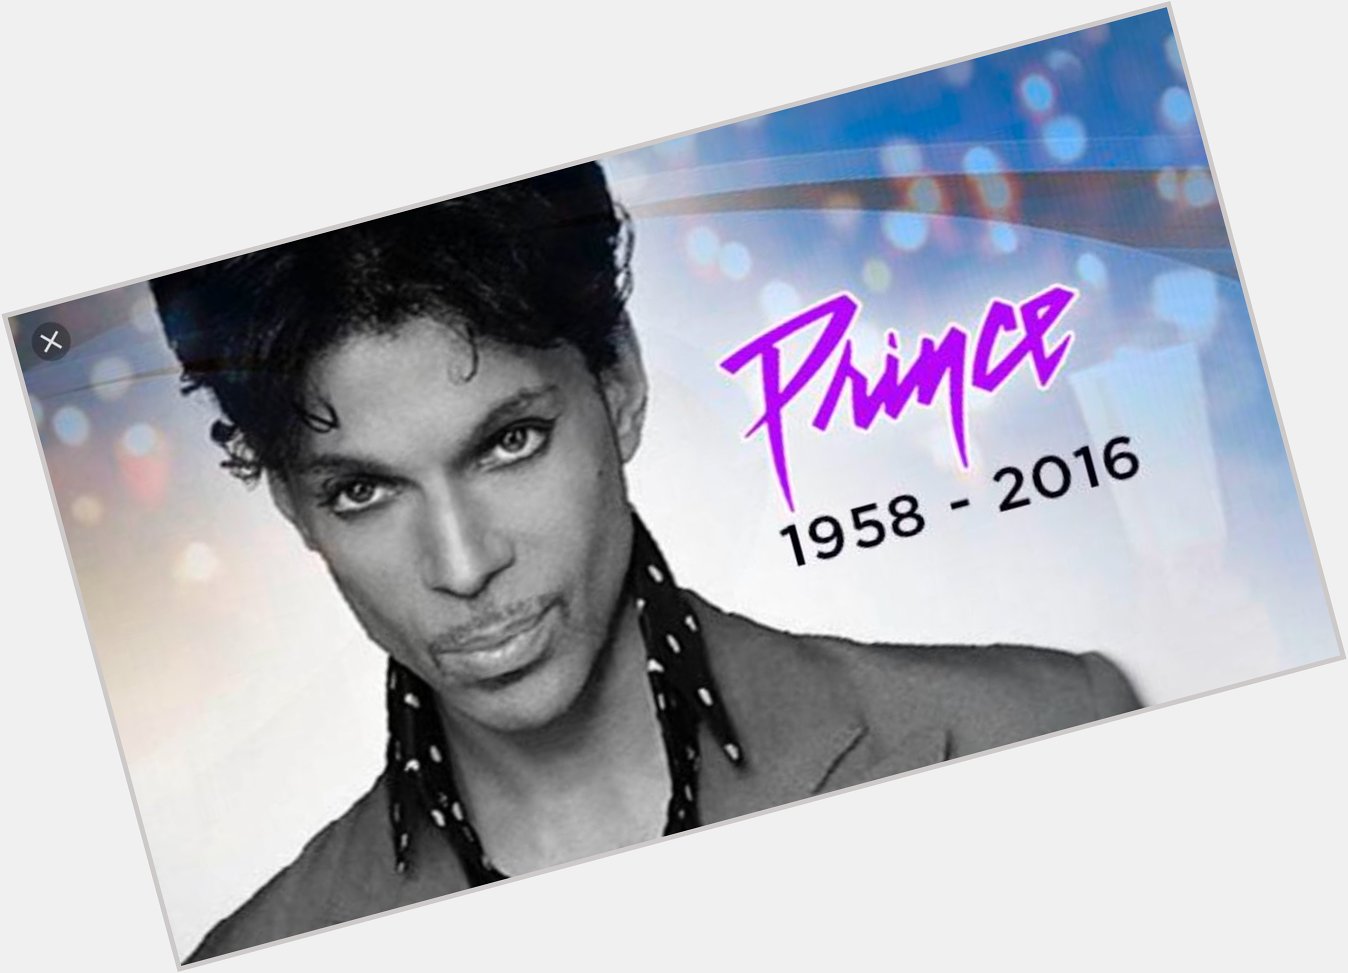 Happy Birthday Prince!!! You are so missed! 